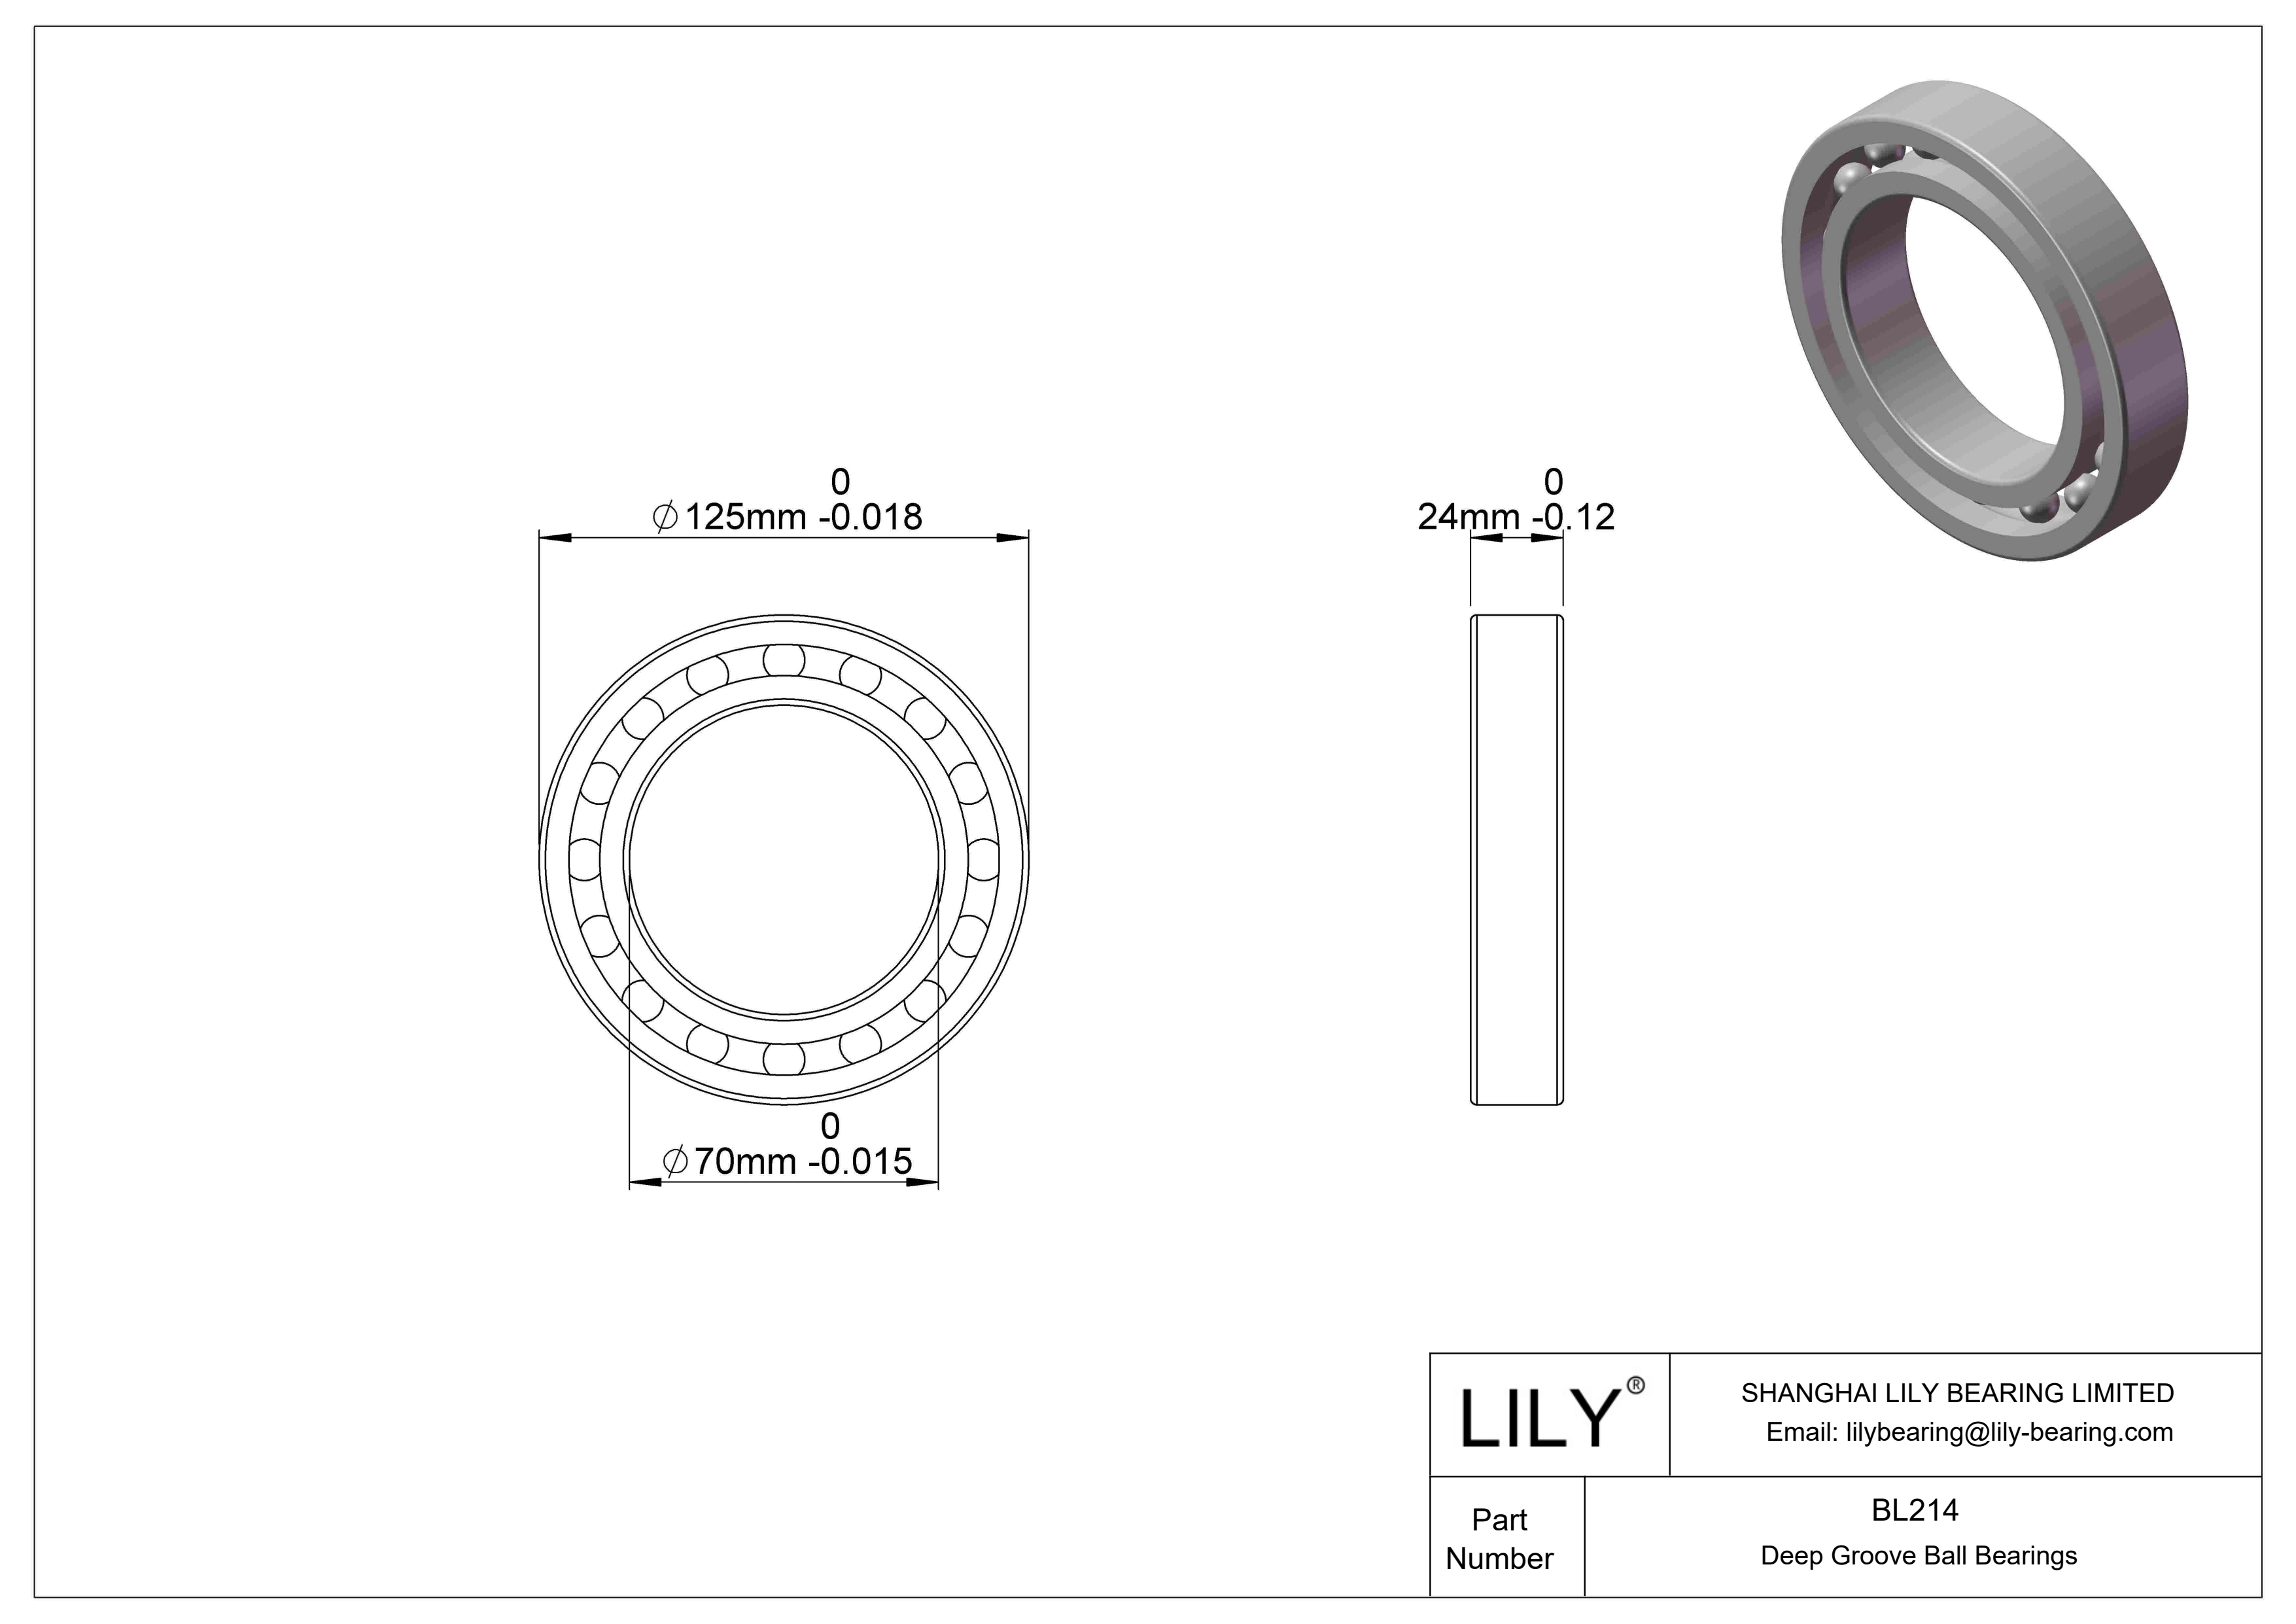 BL214 General Deep Groove Ball Bearing cad drawing